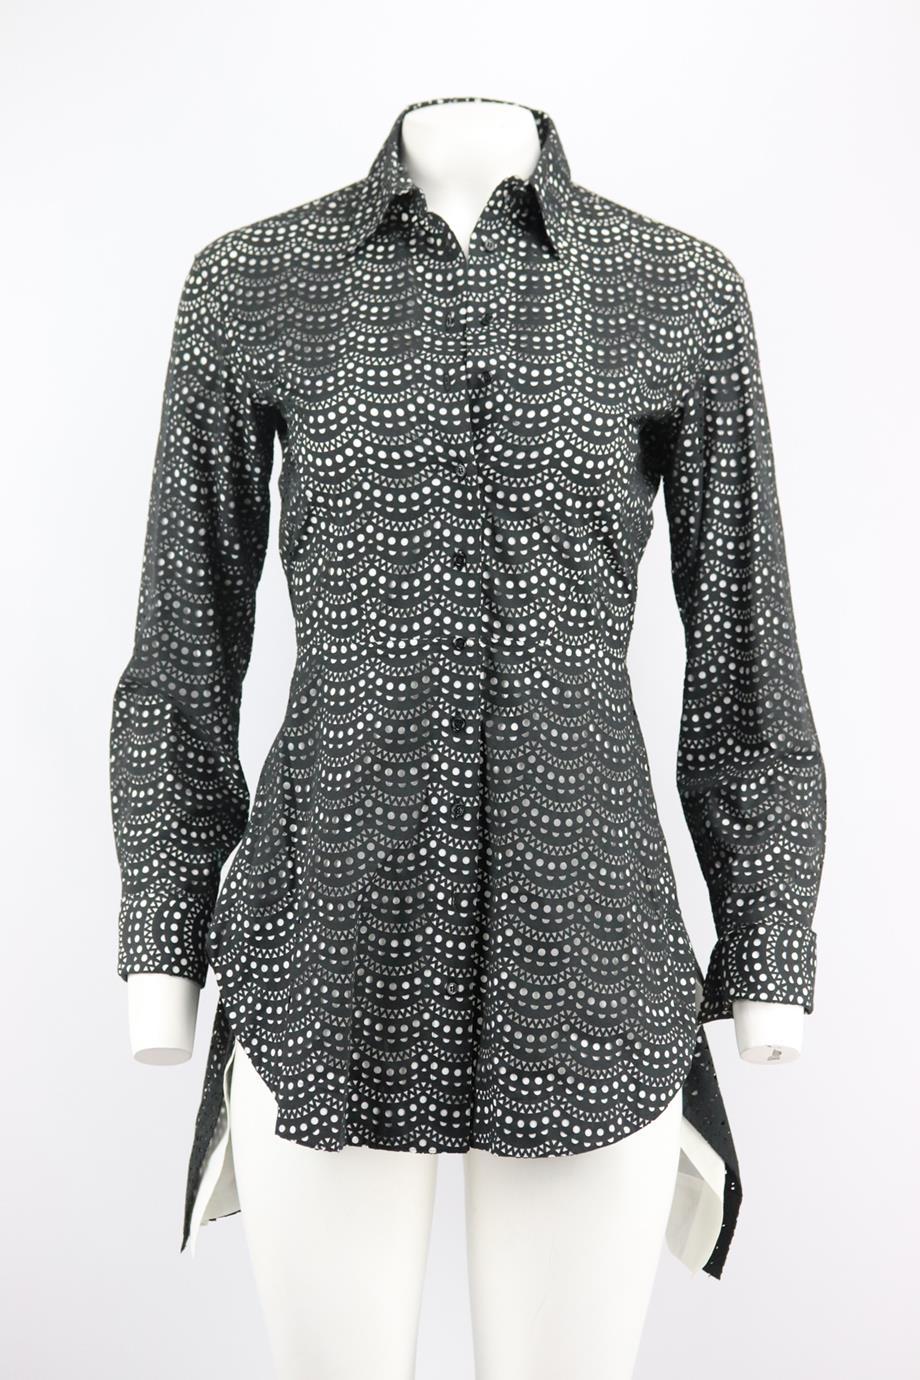 Azzedine Alaïa laser cut cotton blend mini dress. Black and white. Long sleeve, v-neck. Button fastening at front. 65% Cotton, 35% polyester; lining: 100% Cotton. Bust: 32 in. Waist: 26 in. Hips: 36 in. Length: 28 in. Very good condition - No sign